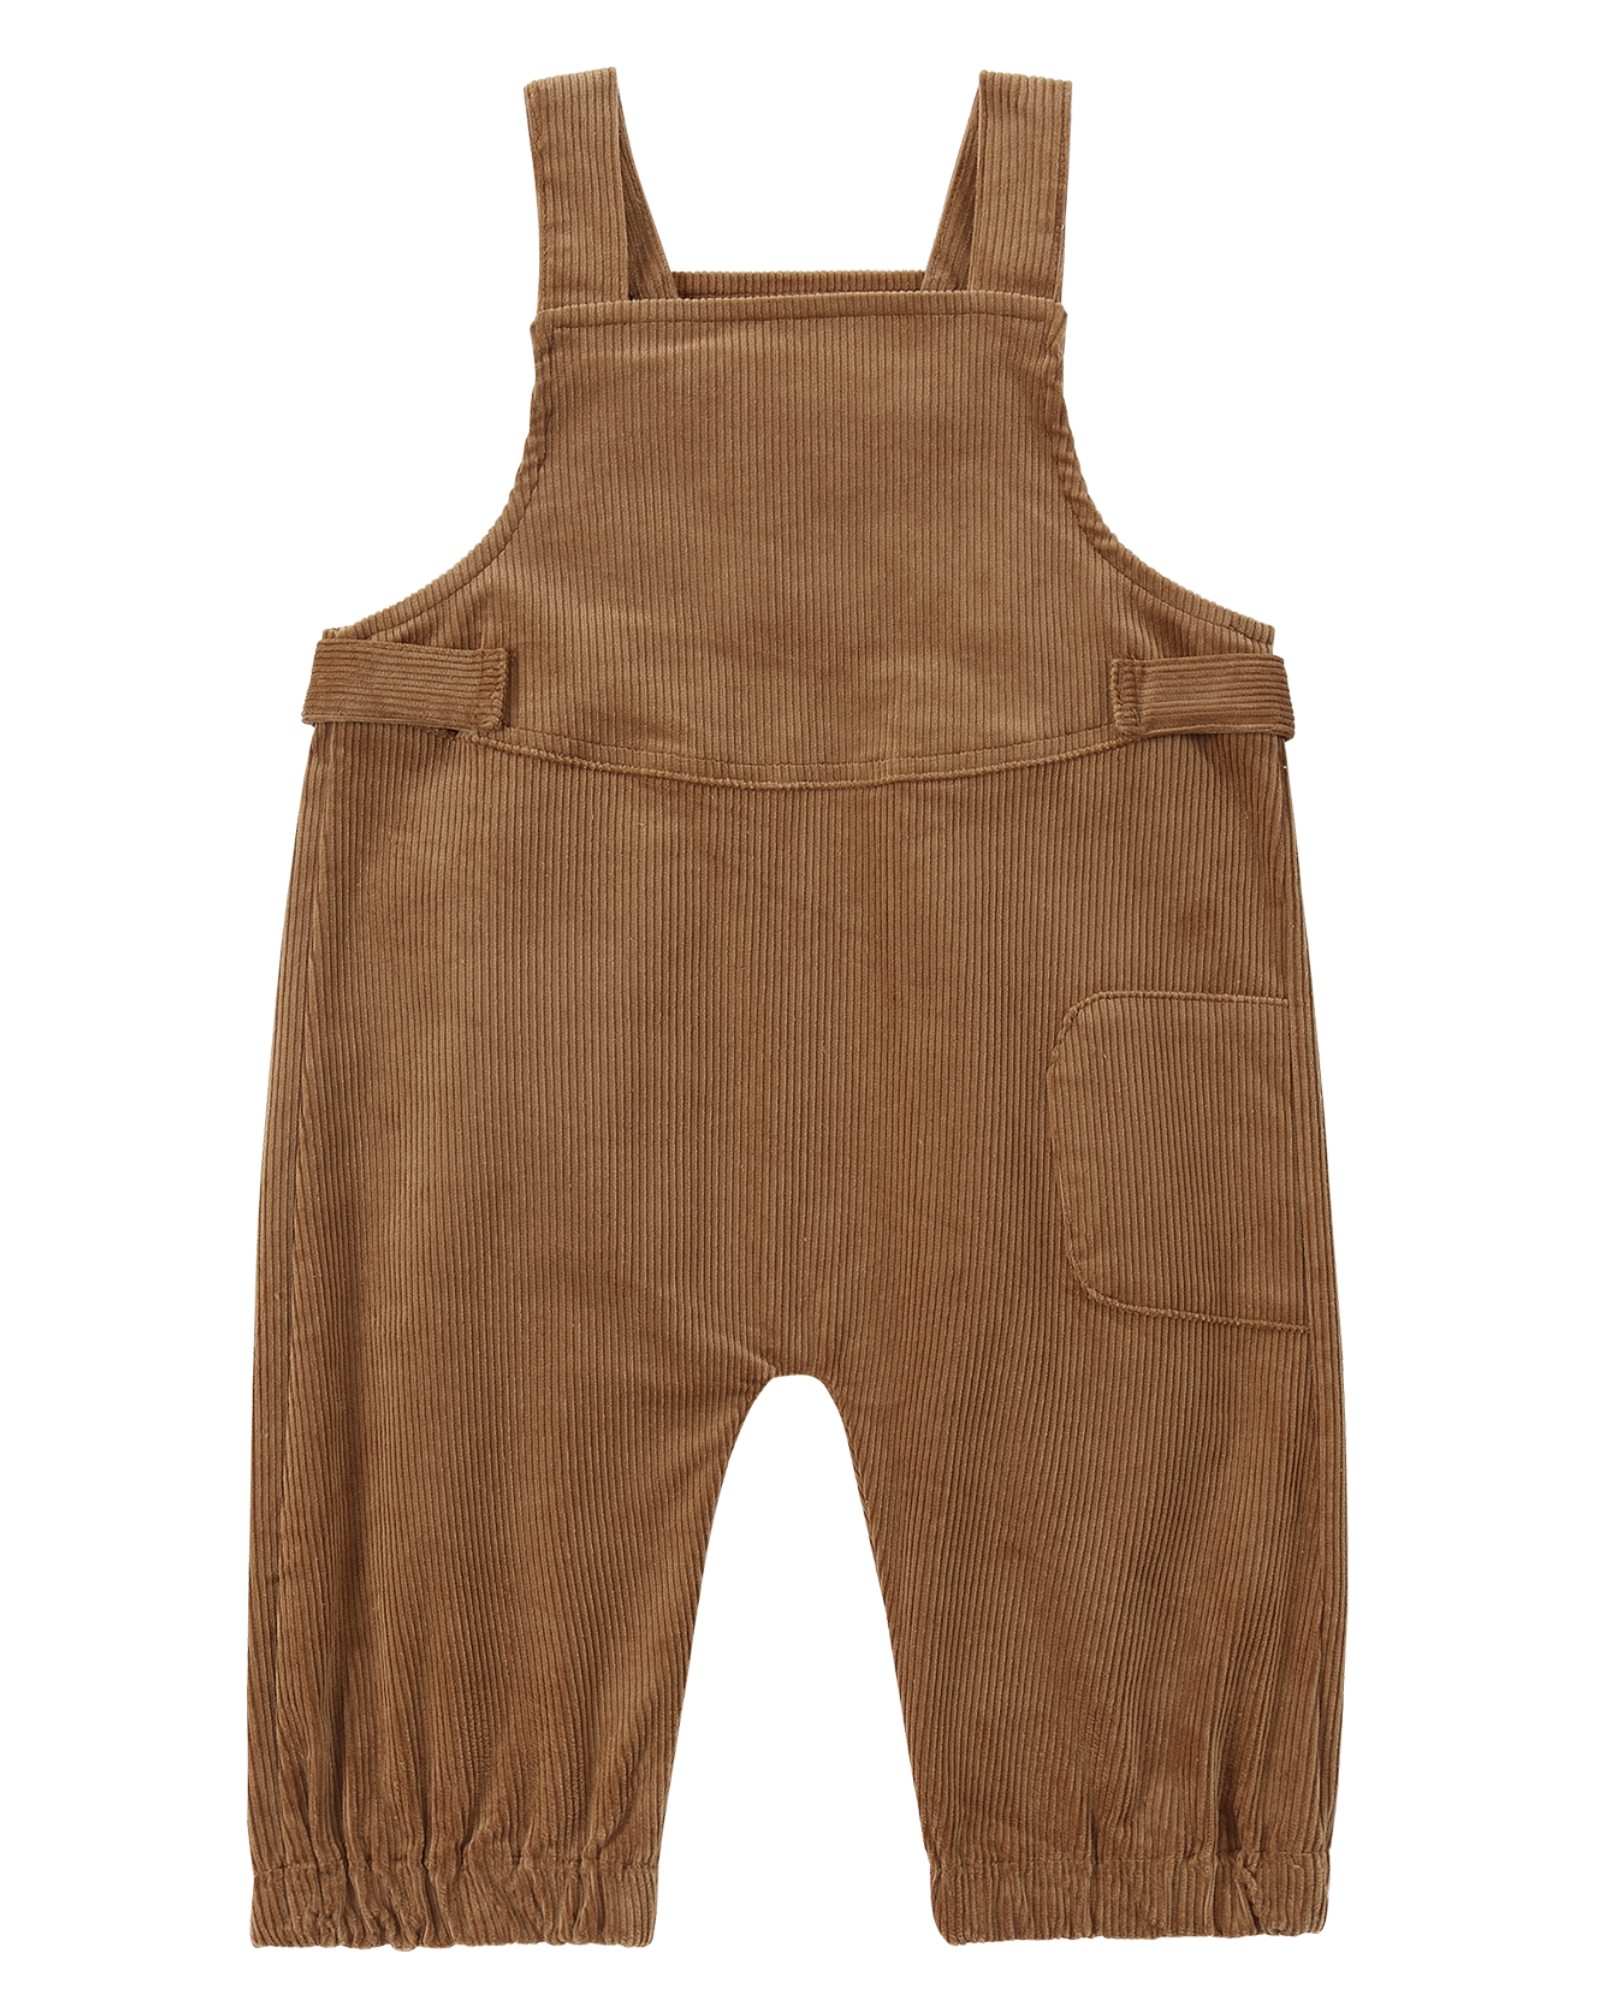 Corduroy Overall. Ginger Bread